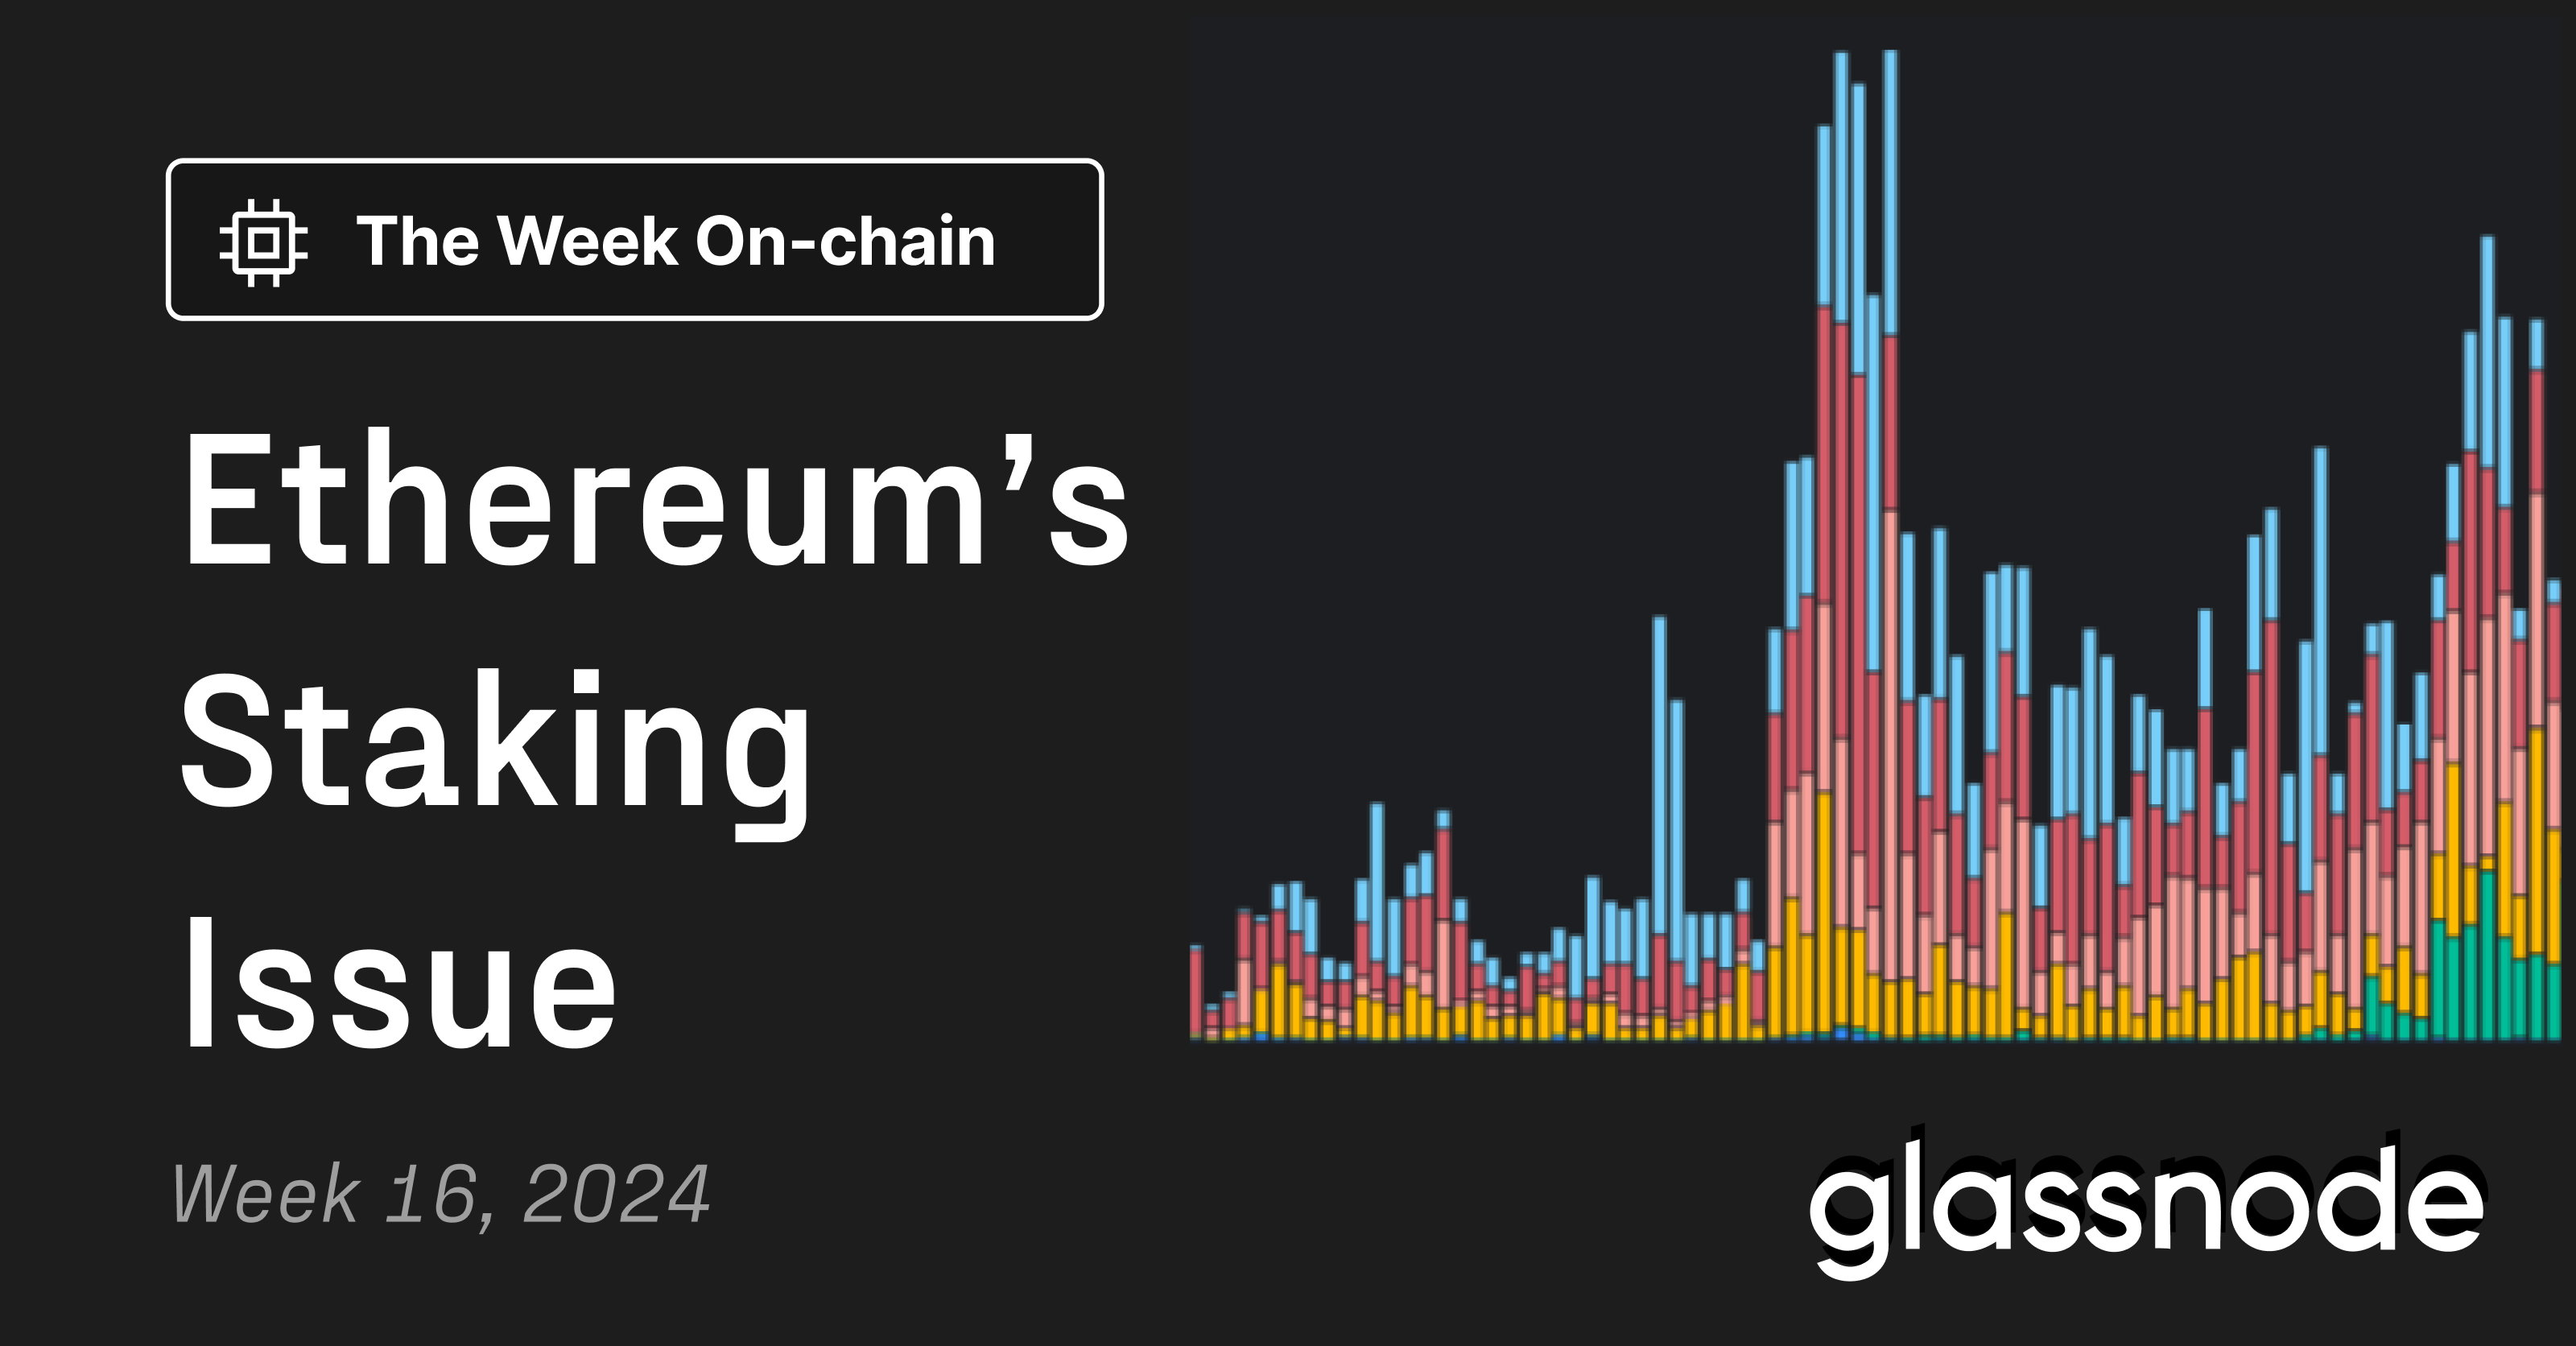 Ethereum's Staking Issue